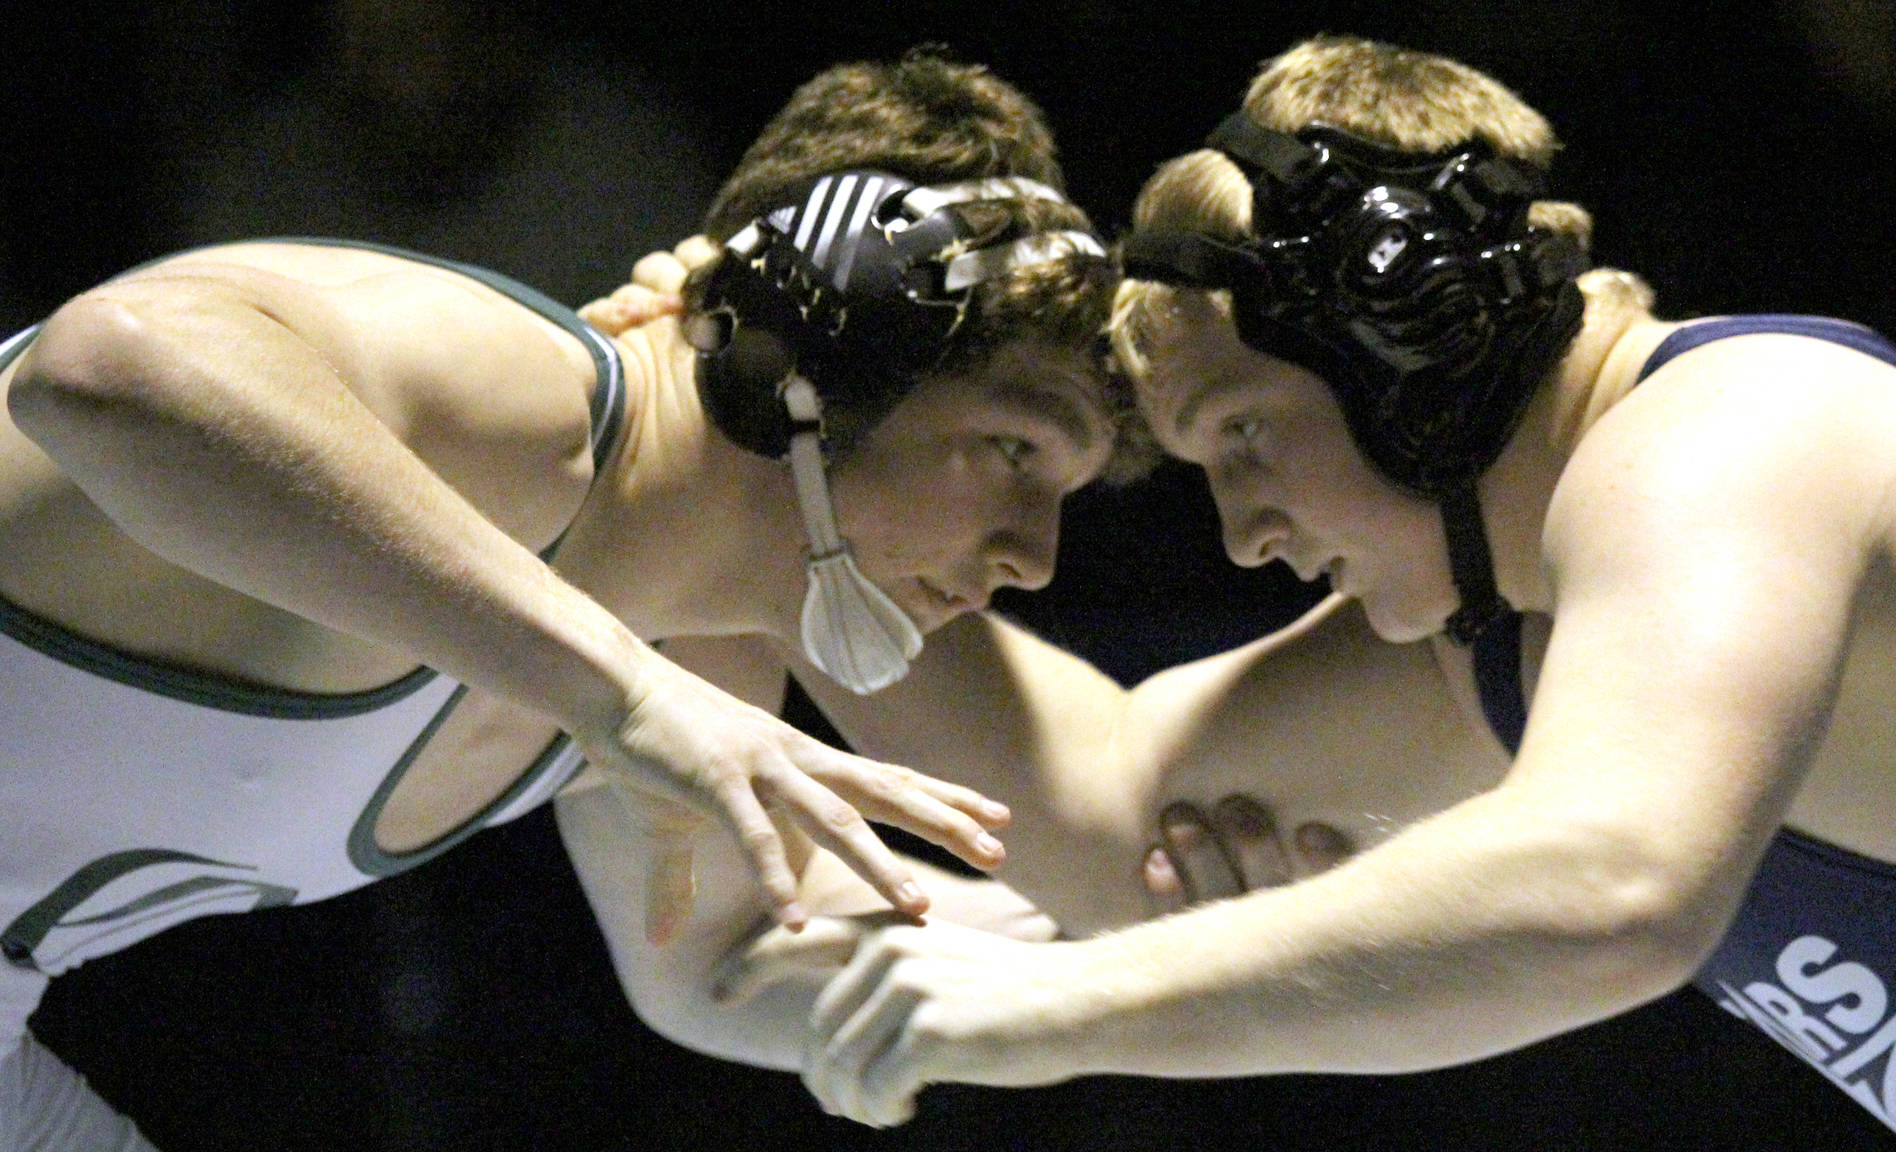 Colony senior Levi Hopkins battles Soldotna senior Brennan Werner early in the 189-pound title match of the Northern Lights Conference meet Saturday at Palmer High. (Photo by Jeremiah Bartz/Frontiersman)